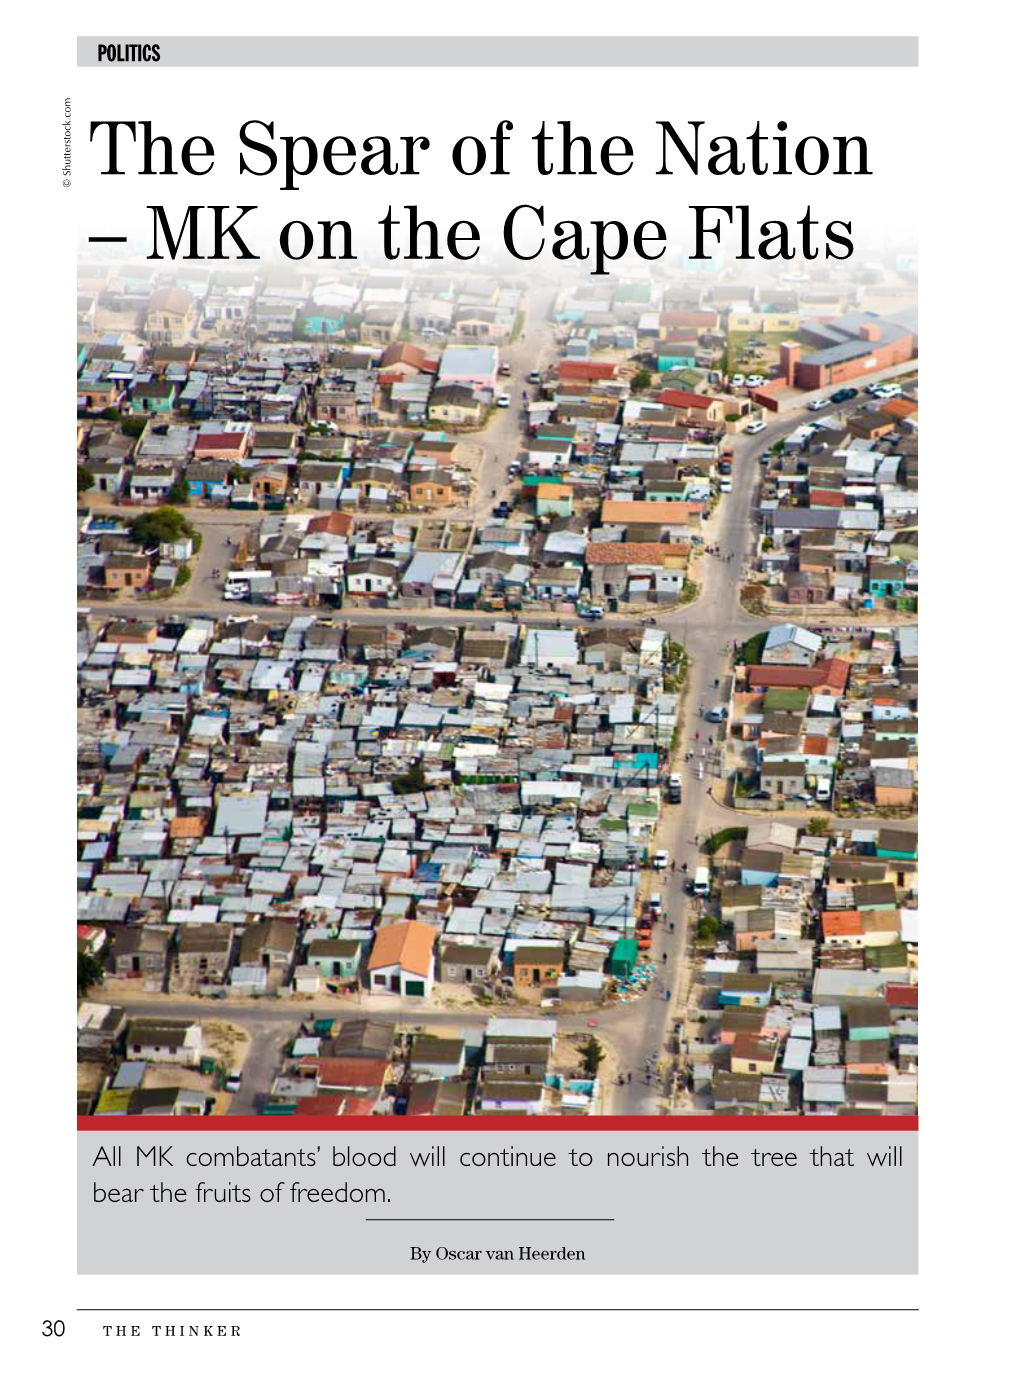 The Spear of the Nation – MK on the Cape Flats